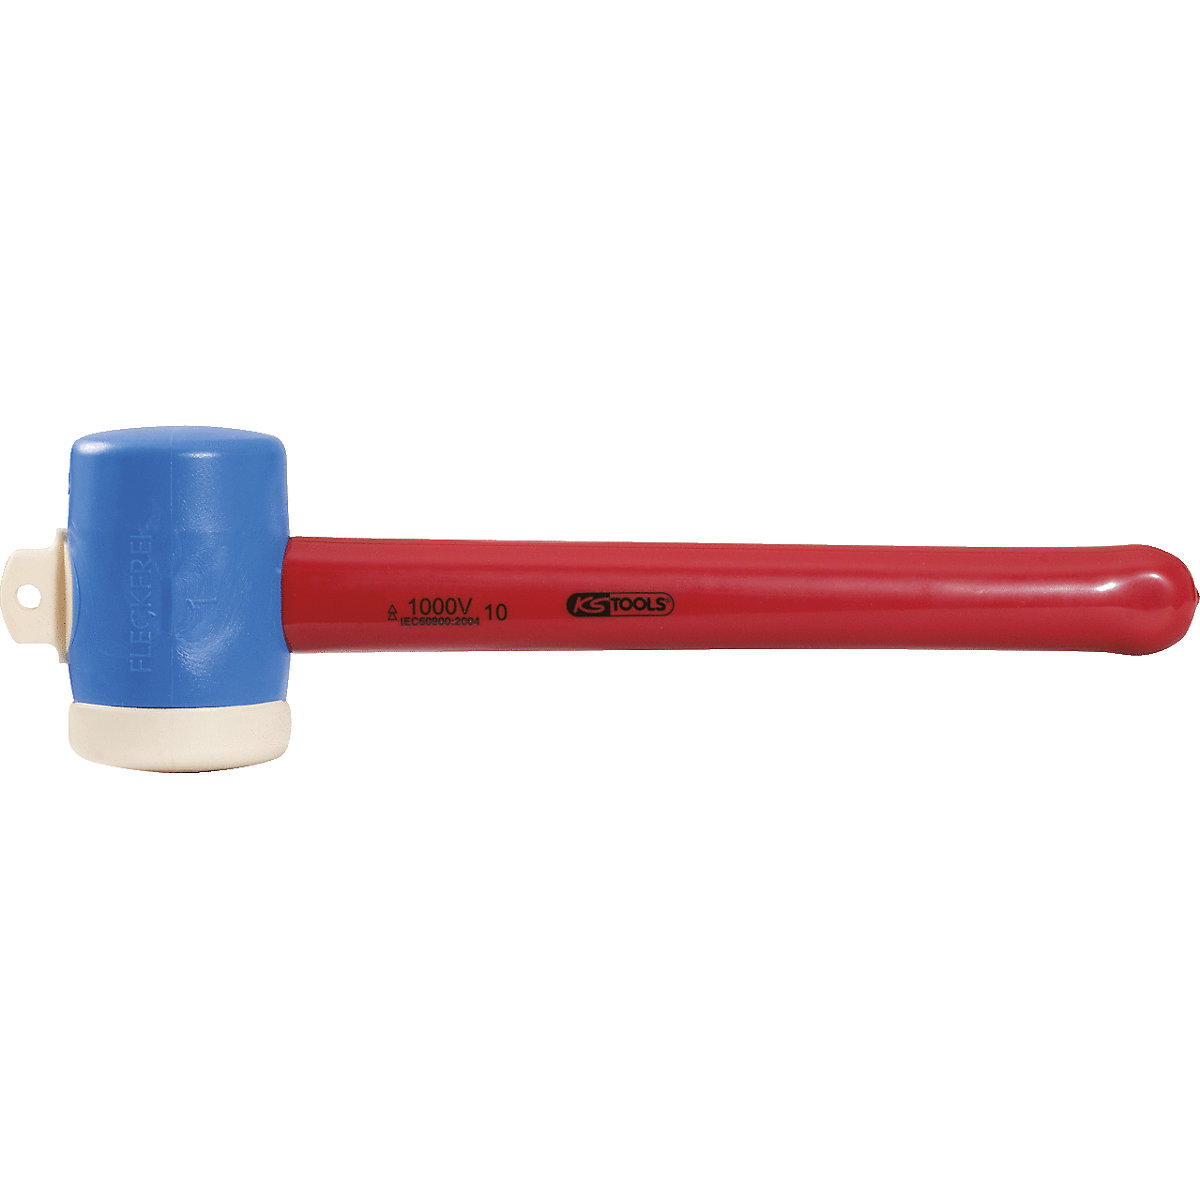 Plastic hammer with protective insulation – KS Tools